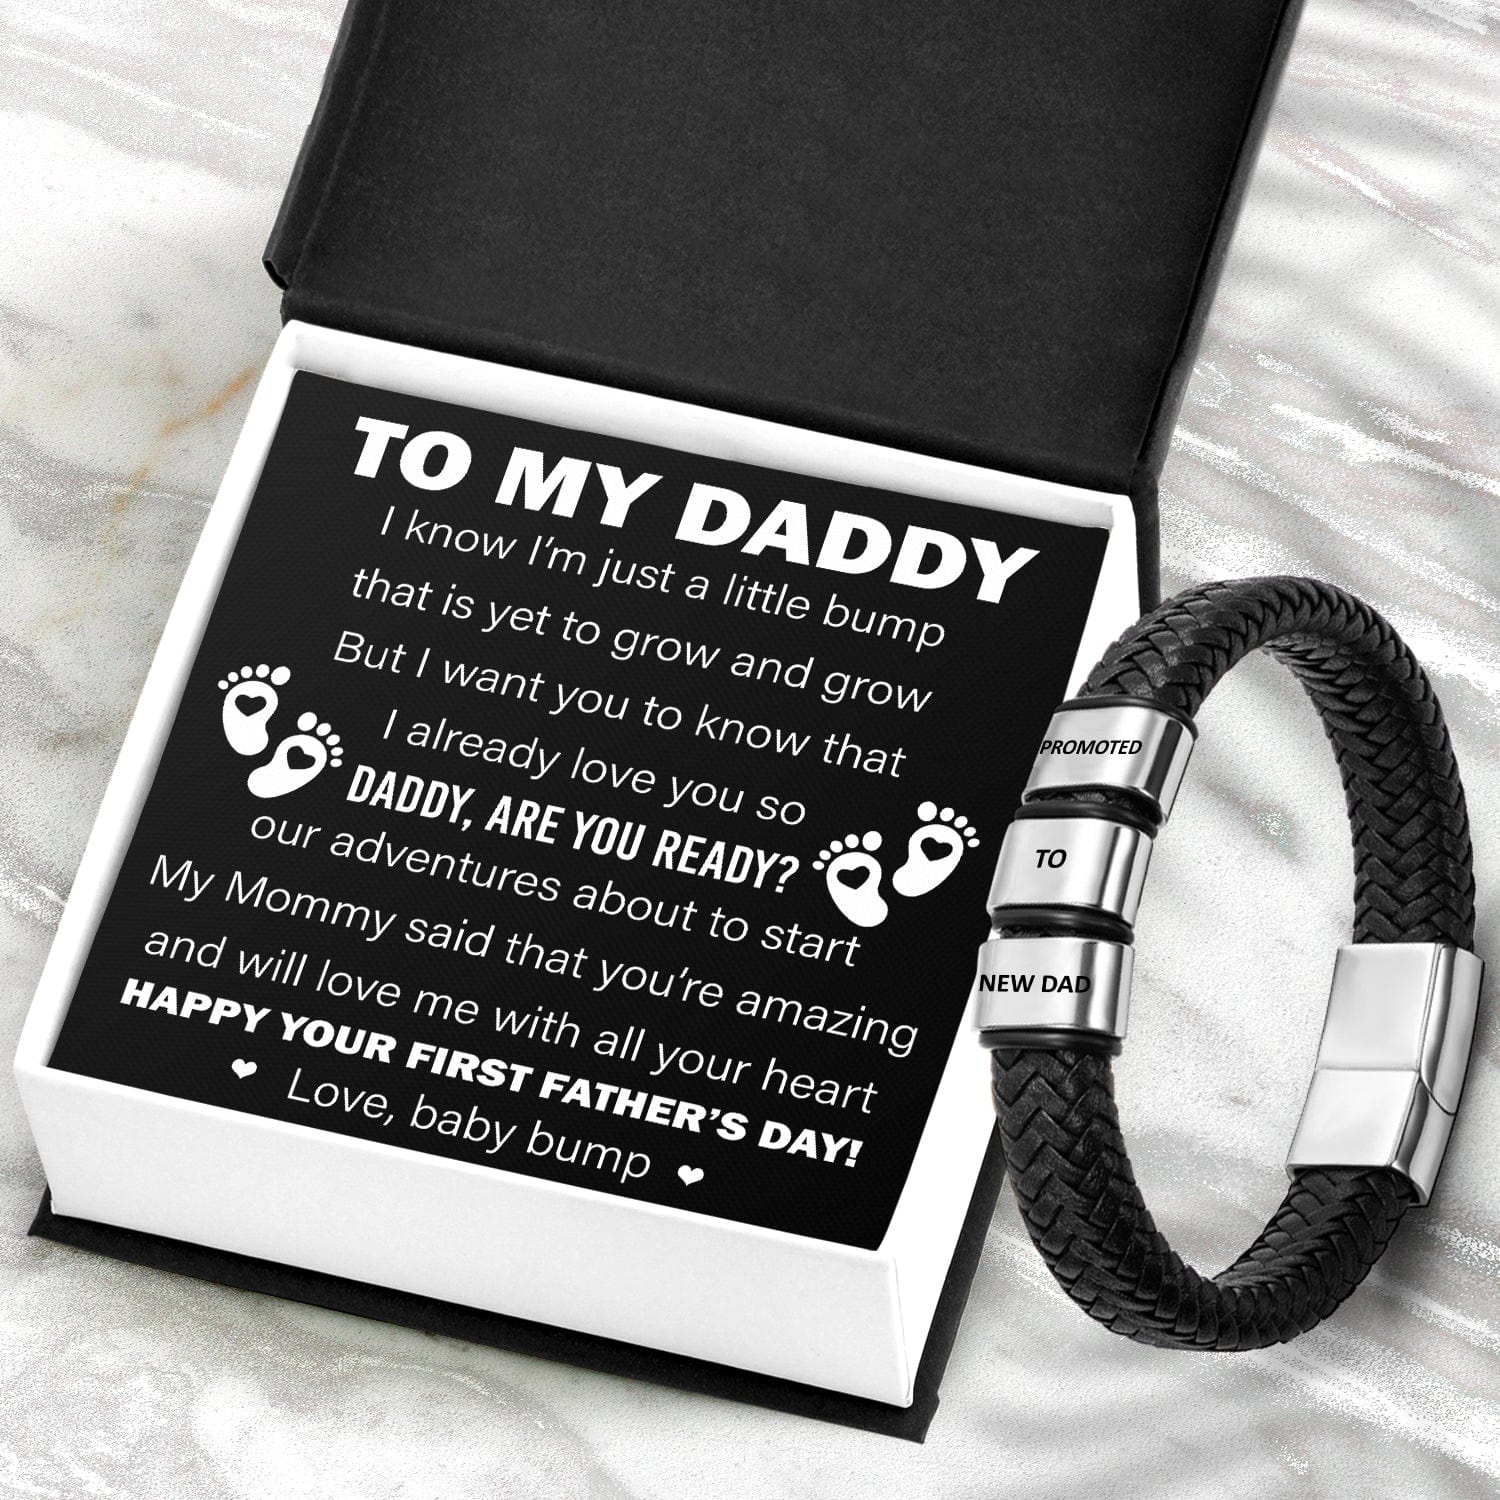 Leather Bracelet - Family - To My Daddy - Happy Your First Father’s Day! - Gbzl18006